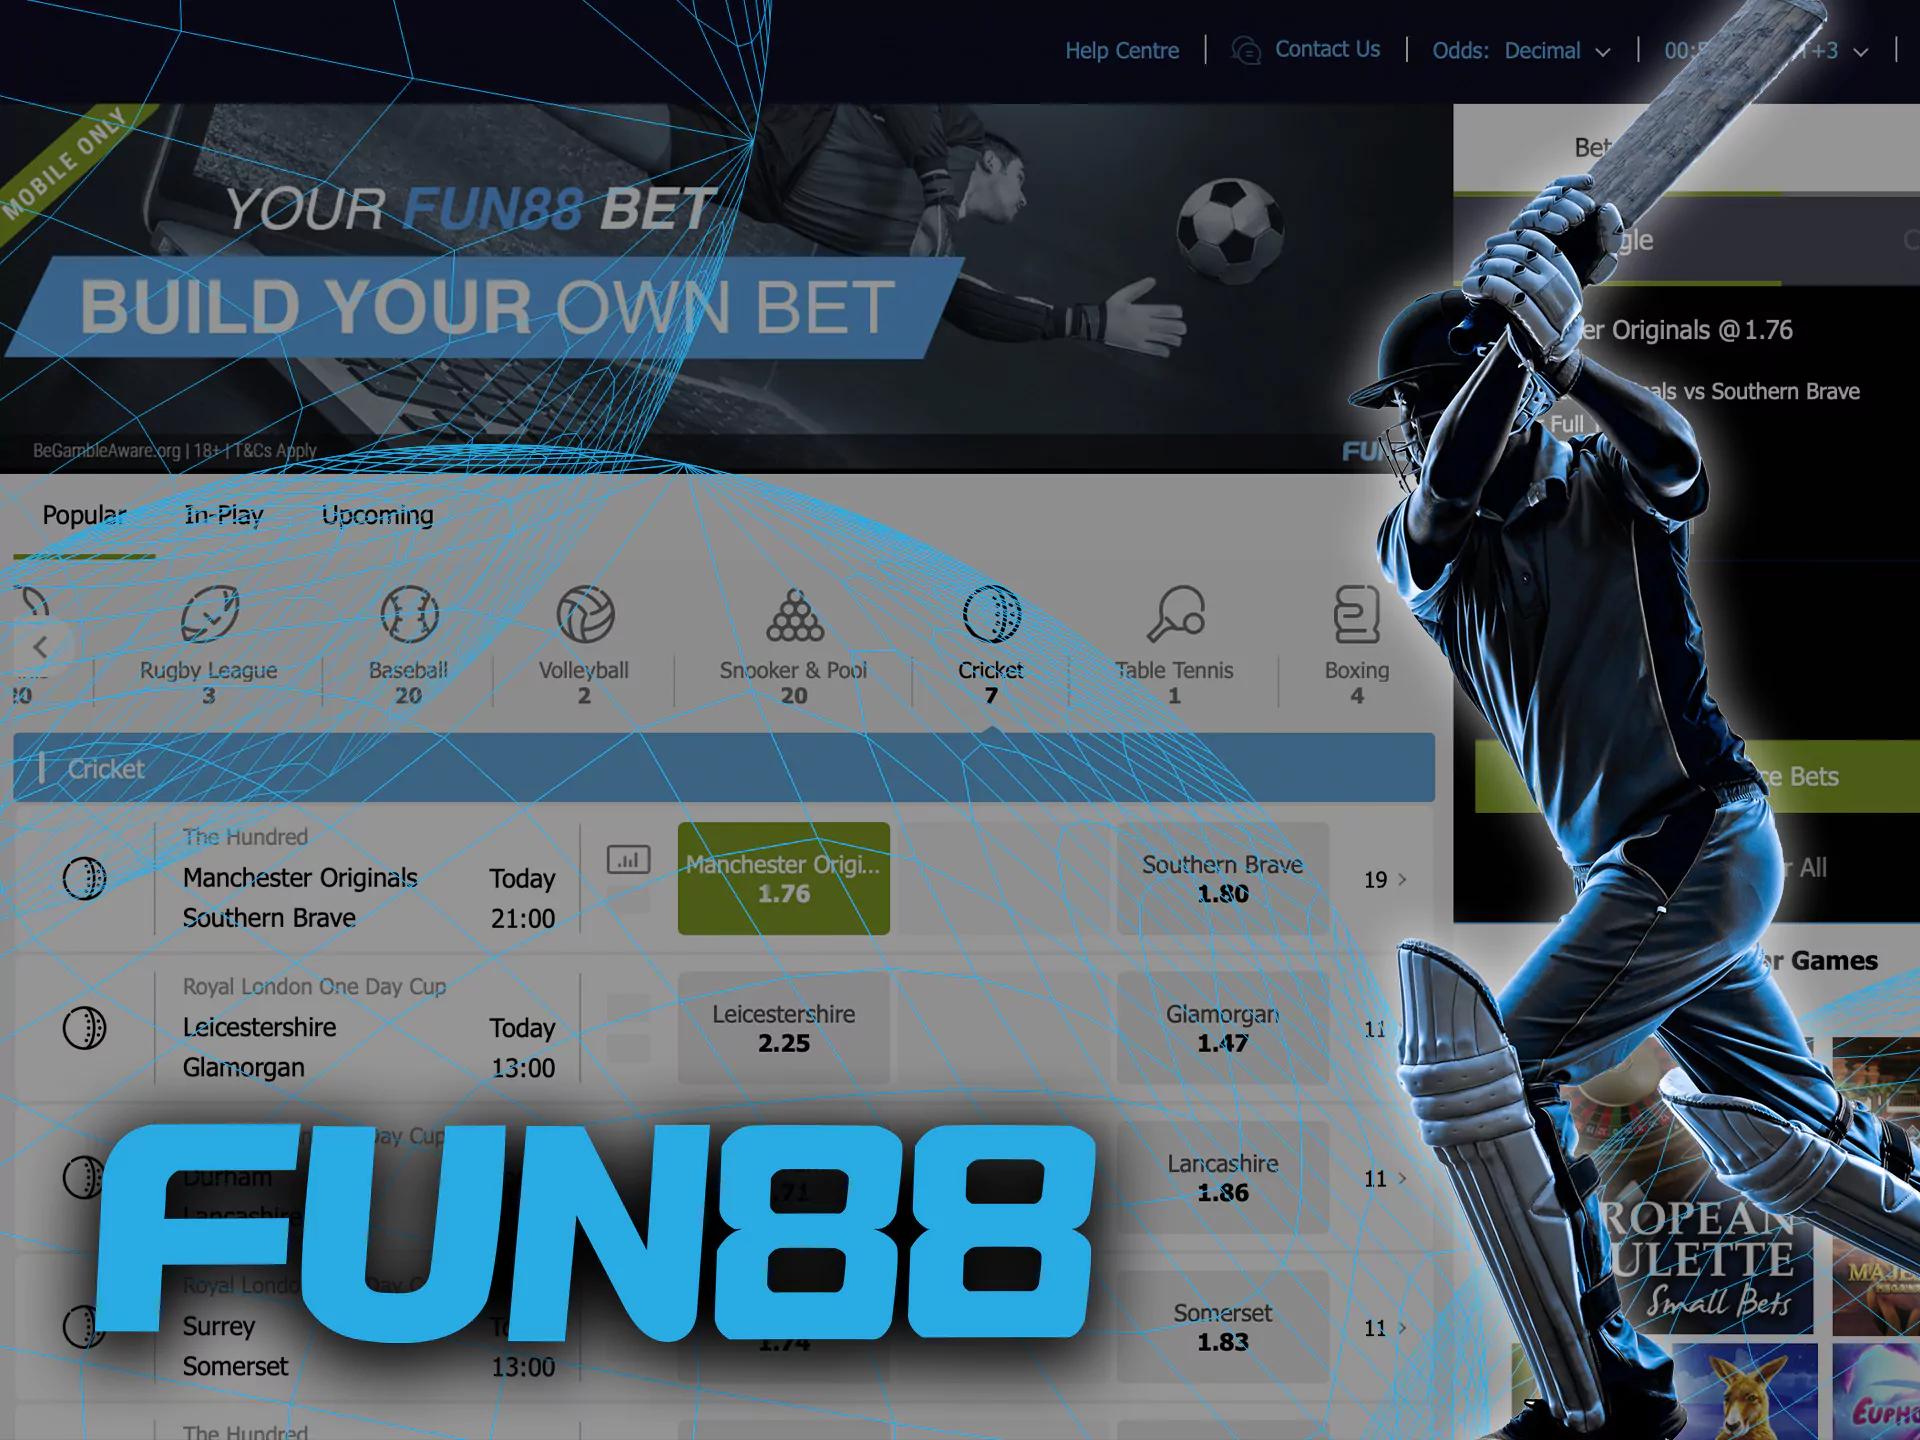 You'll find numeous markets on cricket betting in the Fun88 sportsbook.